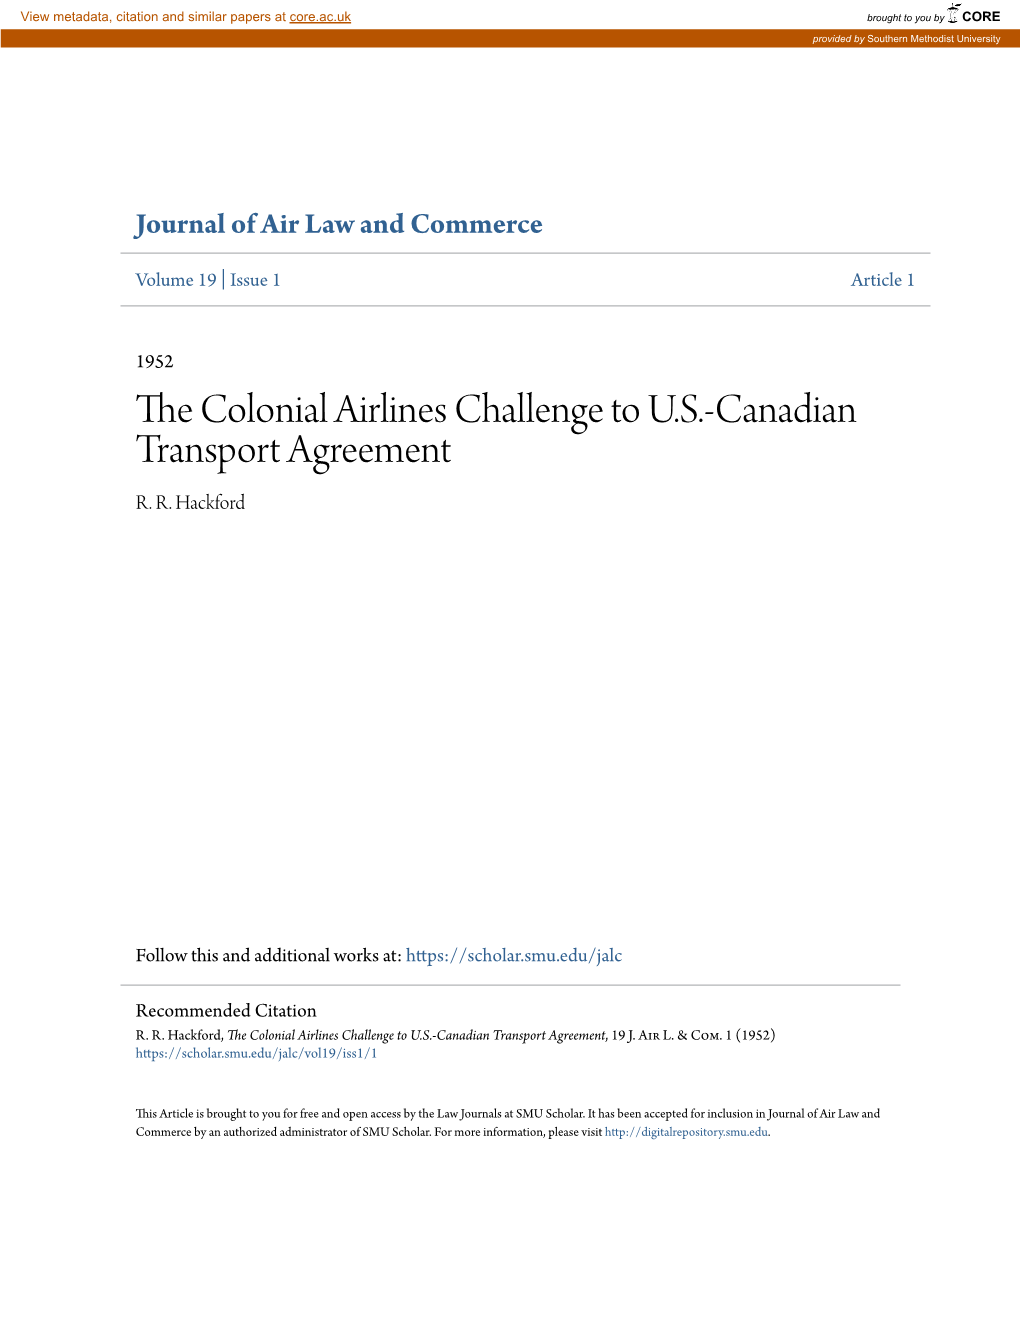 The Colonial Airlines Challenge to U.S.-Canadian Transport Agreement, 19 J